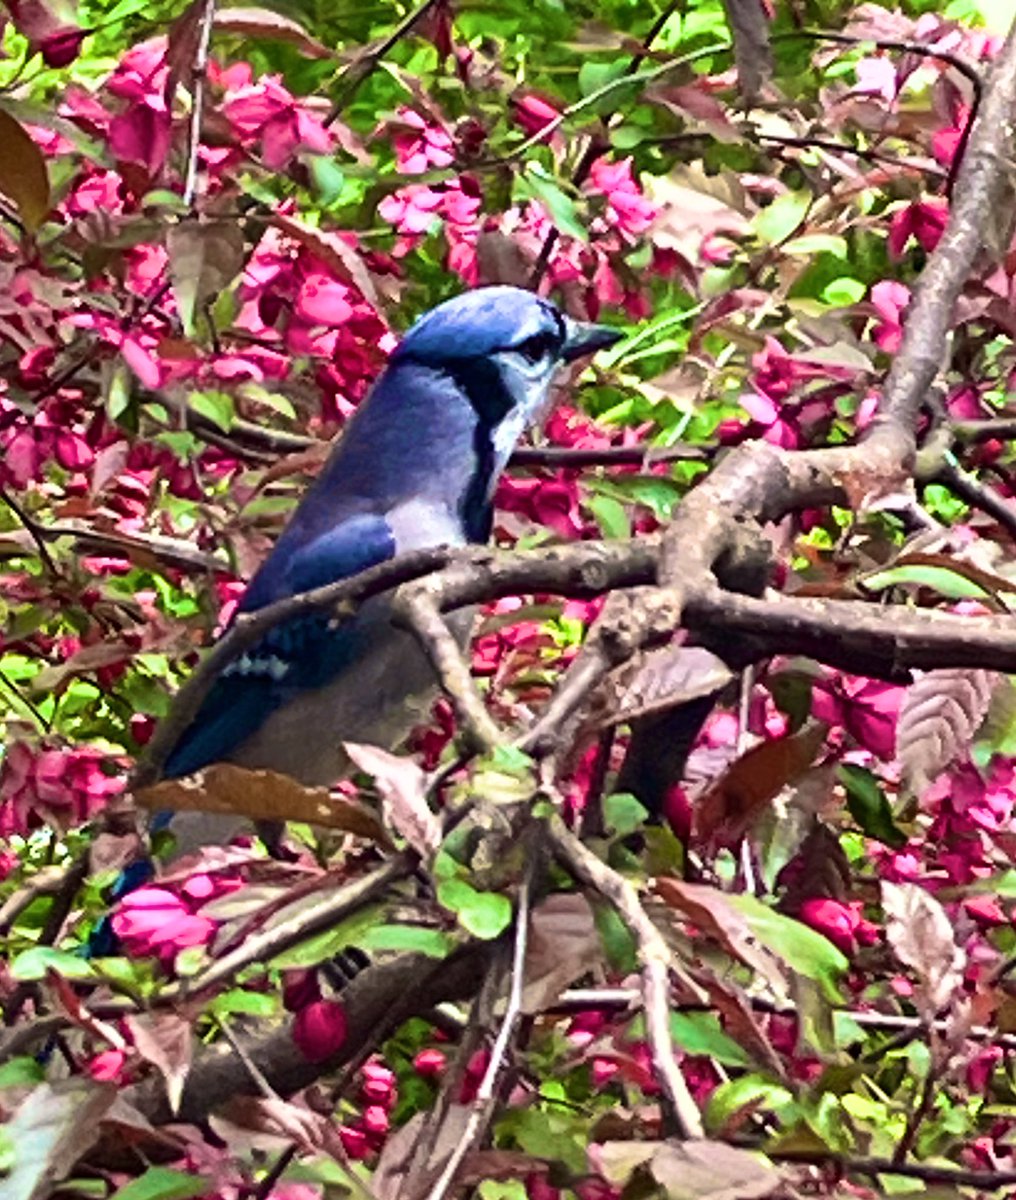 The wait-on-line tree for the kitchen feeder is in bloom. #birds #spring